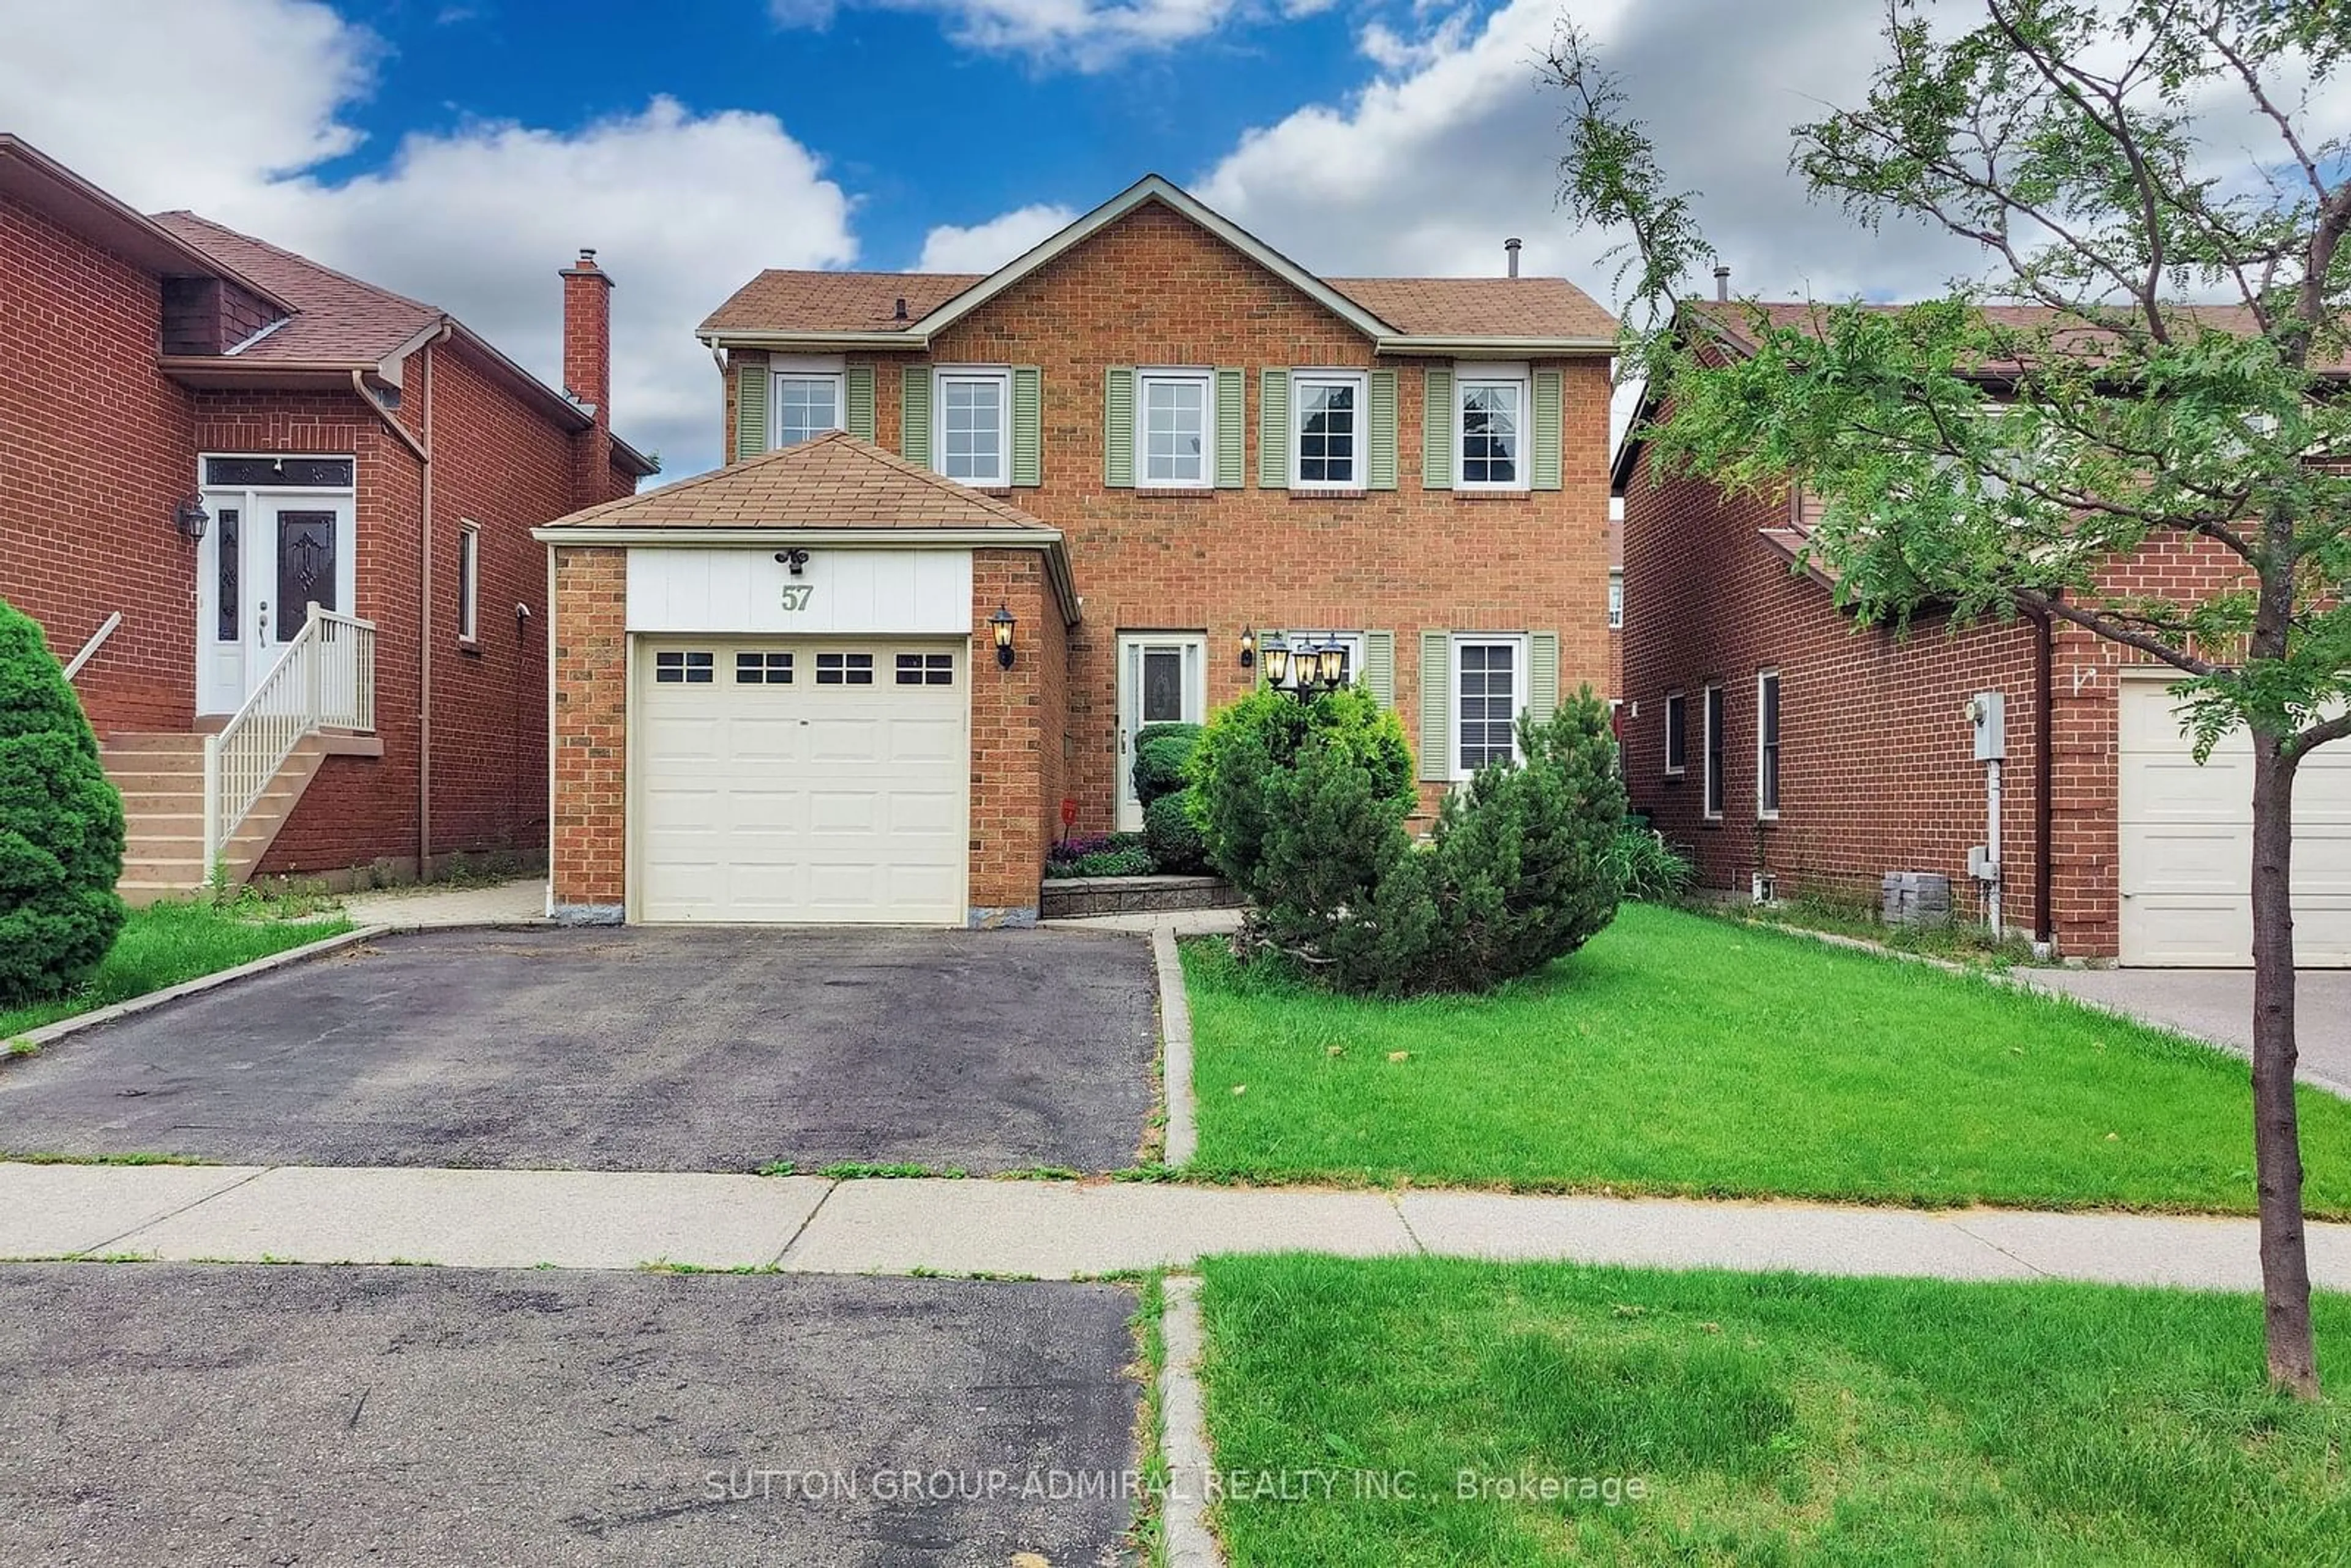 Home with brick exterior material for 57 Nuttall St, Brampton Ontario L6S 4V1